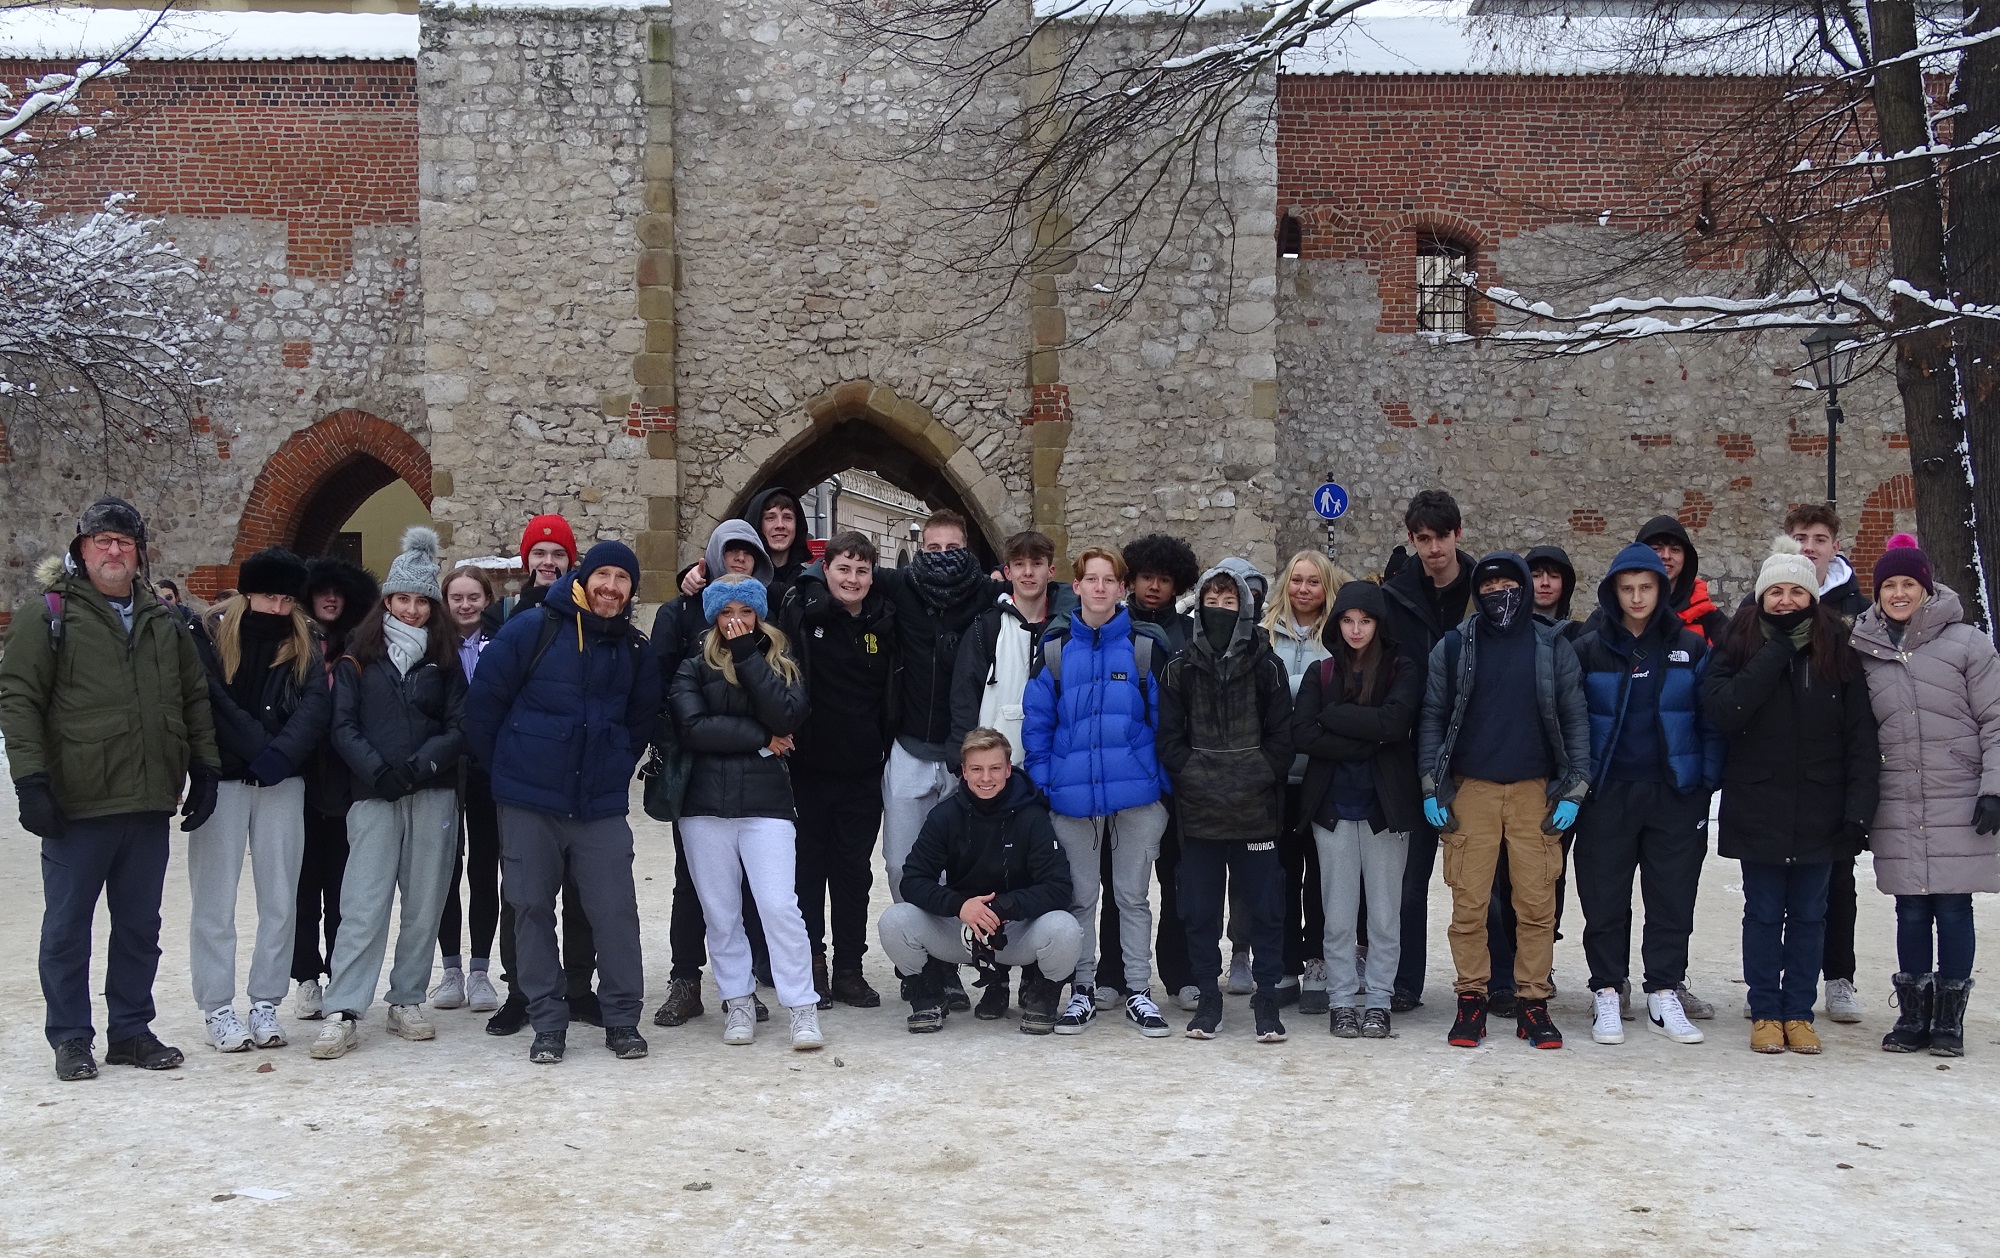 Students pose outside a castle during their Religion, Philosophy and Ethics and History trip to Poland